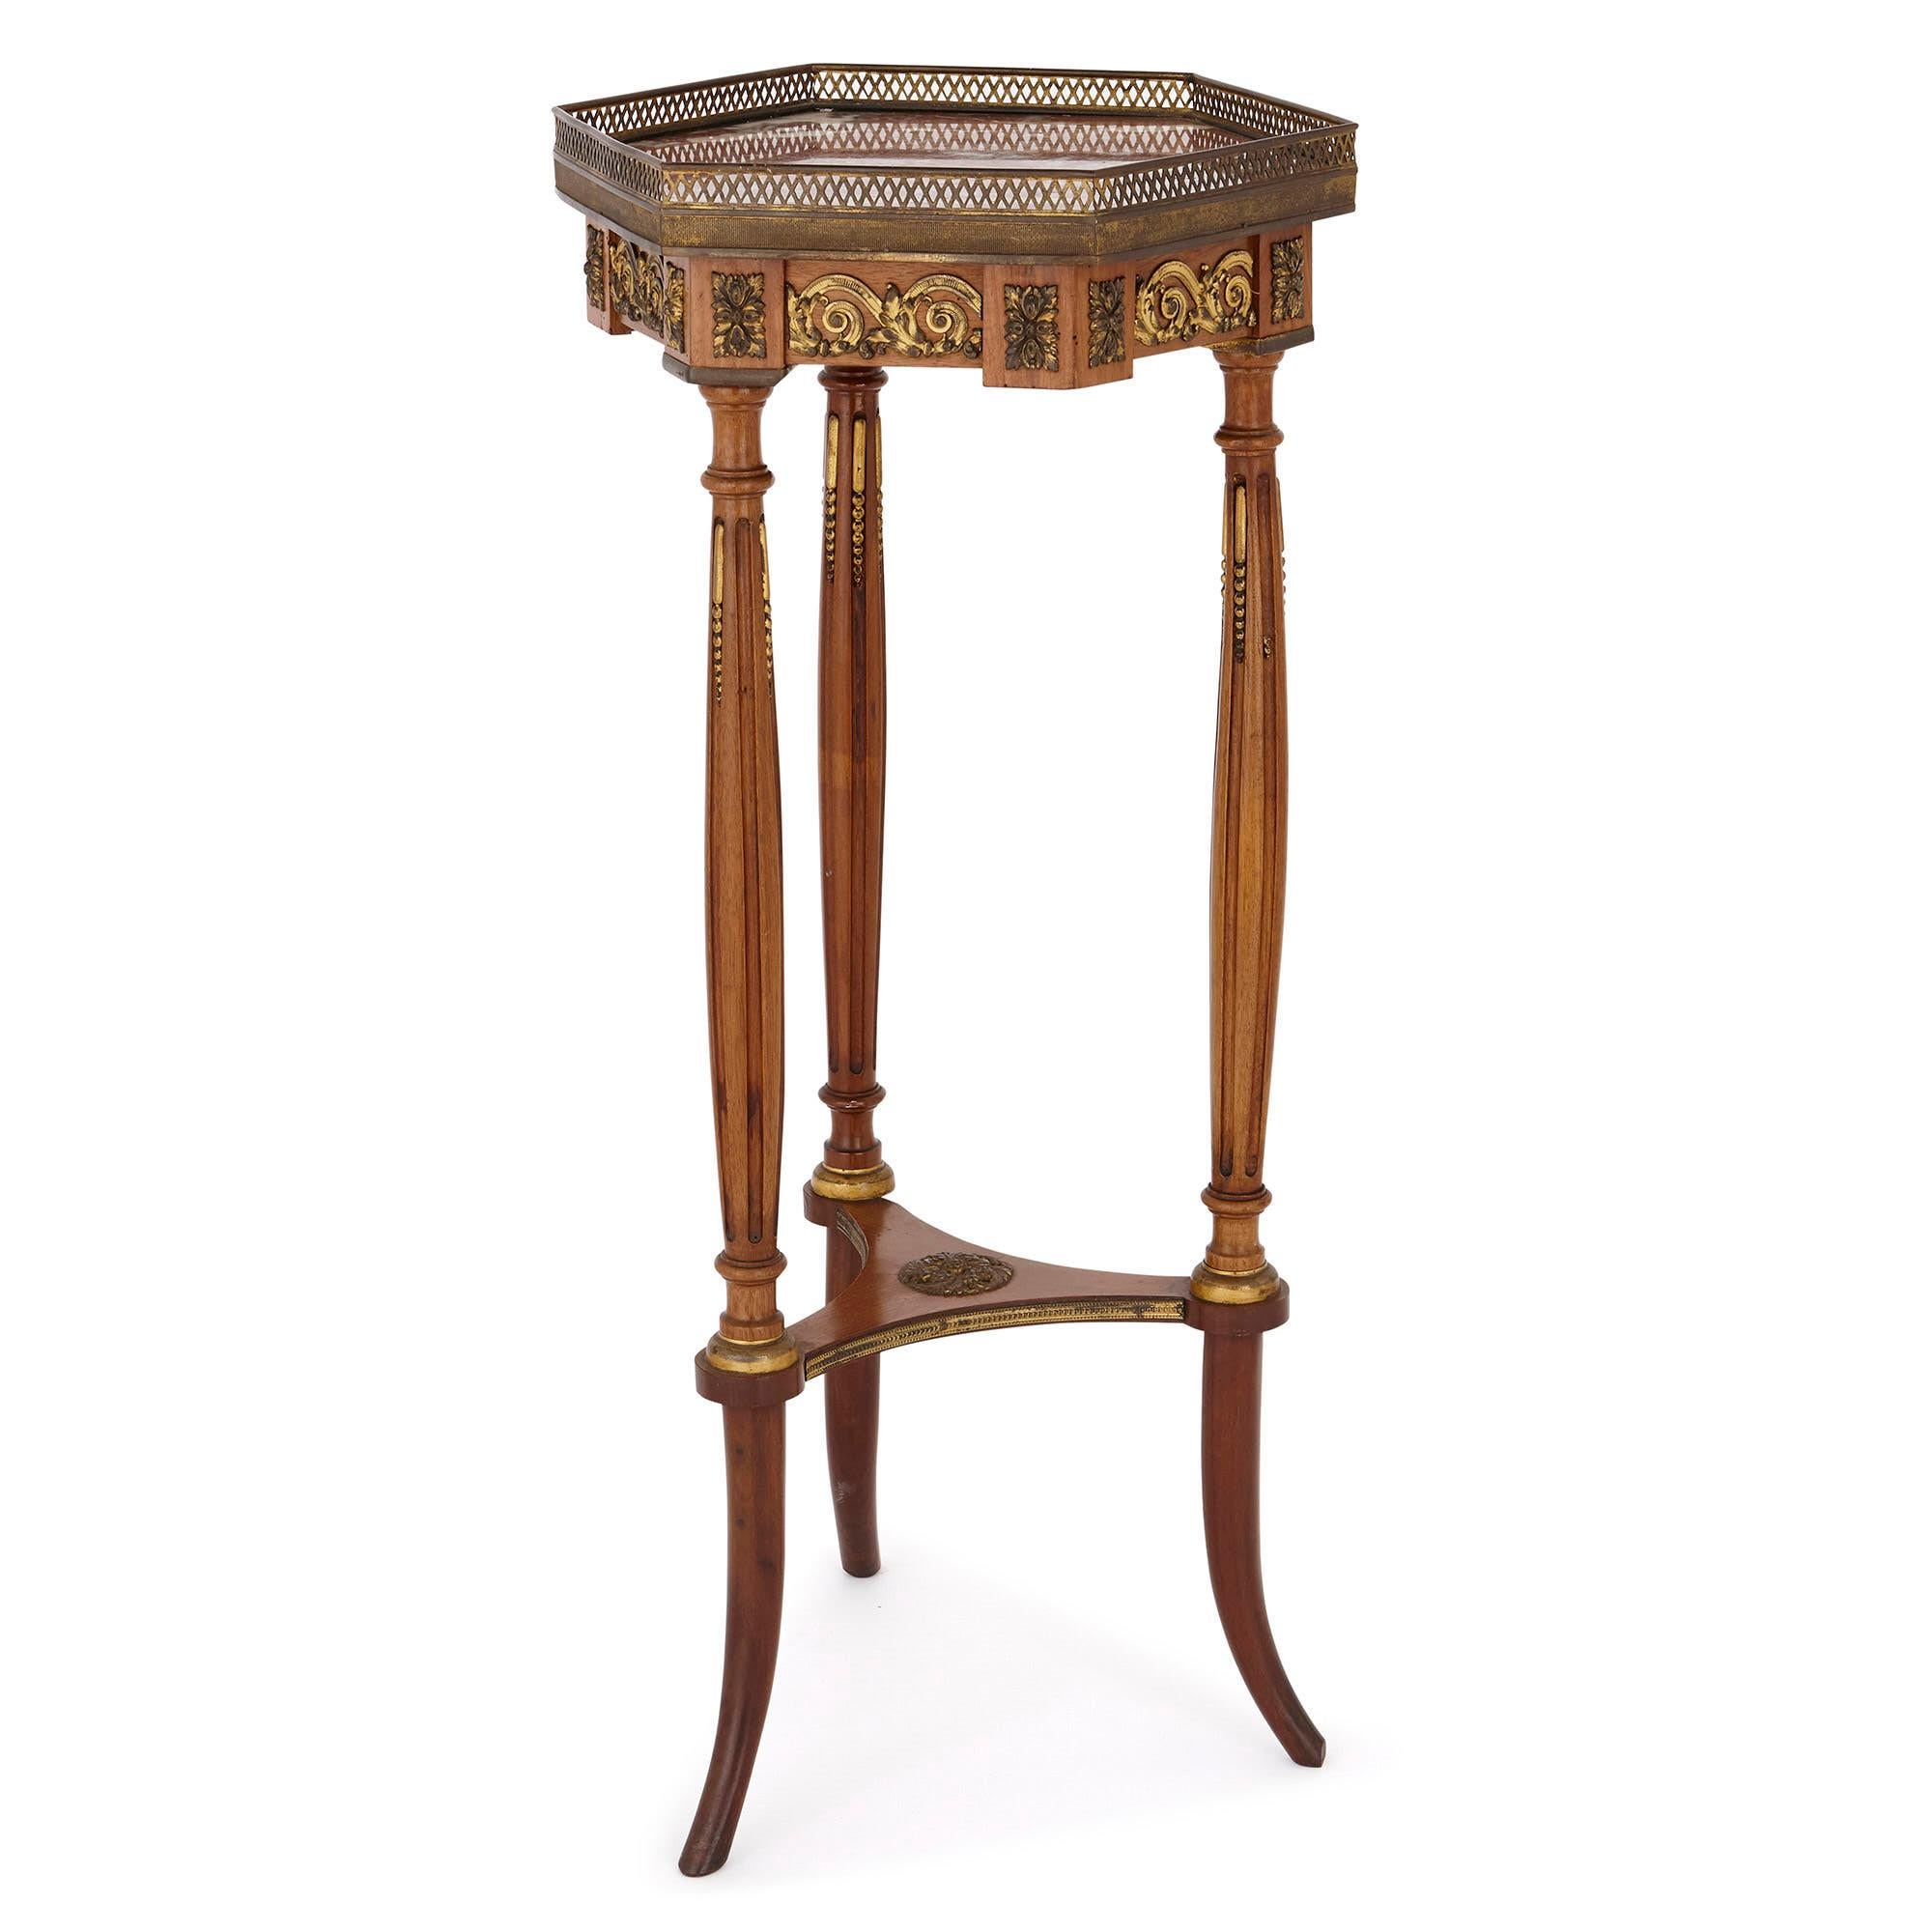 This side table is a wonderful piece of French 19th century furniture, unique for its hexagonal top and three-legged support. The table is designed in the Louis XVI style of the 18th century, which was fashionably revived in this period. 

The